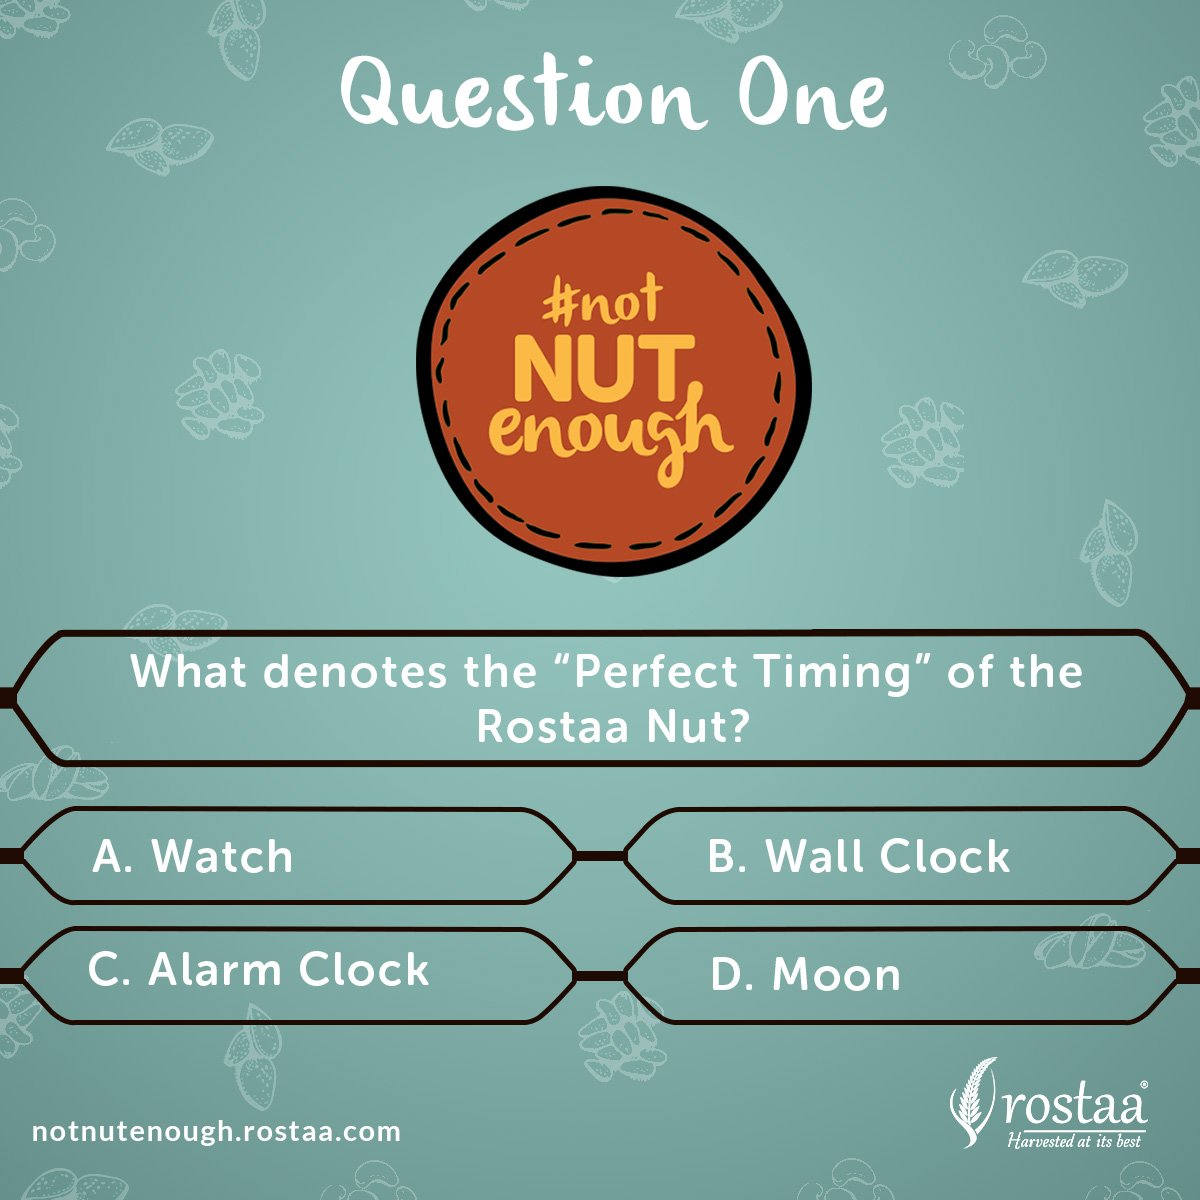 Here comes the first nutty question. All it wants you to do is visit bit.ly/2qLLz8Bnne to know the answer. #NotNutEnough